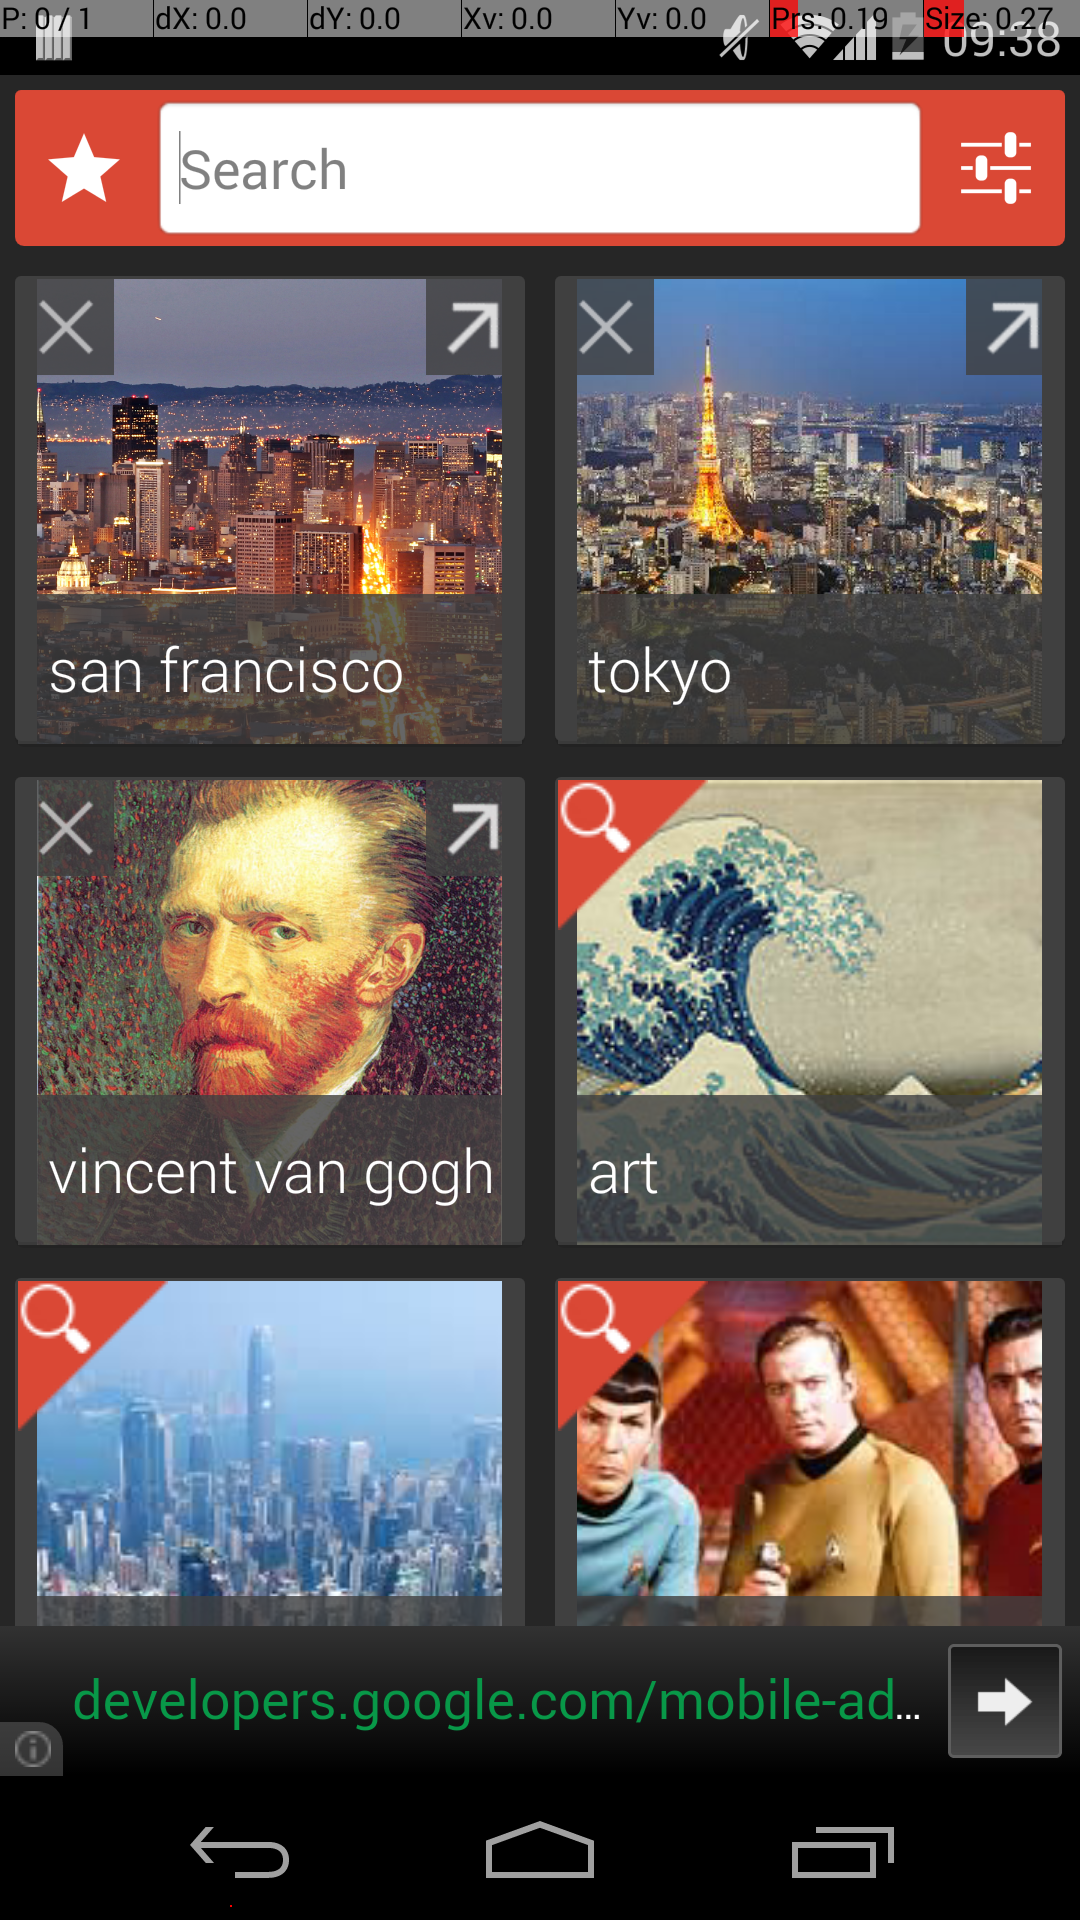 Android application Image Search screenshort